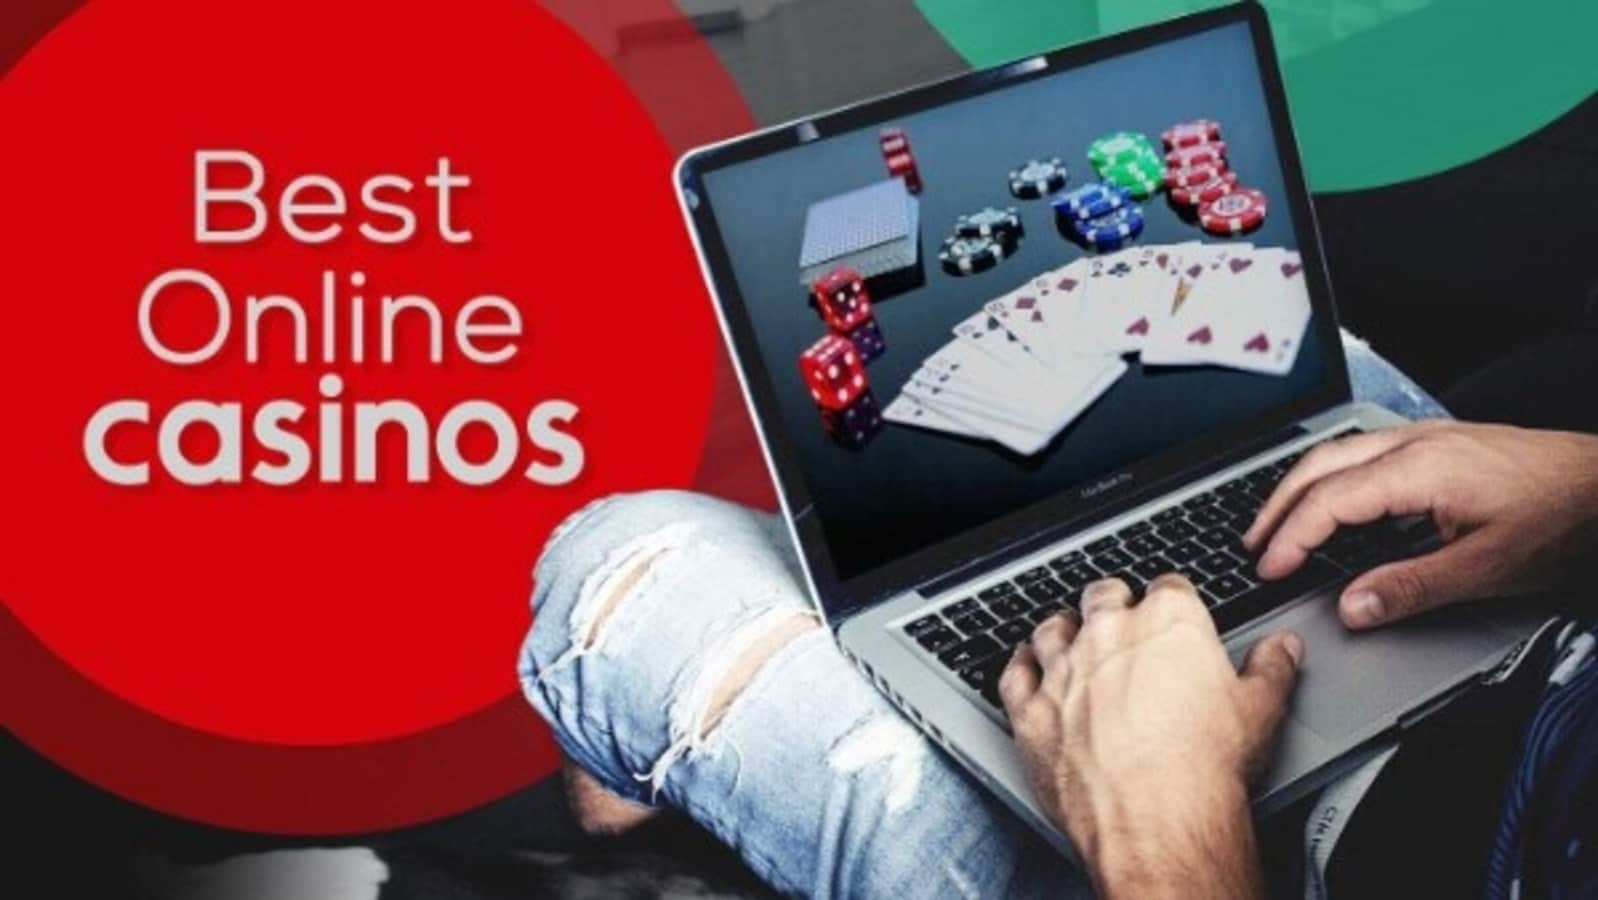 Best Gambling Sites Ranked by Real Money Casino Games, Bonuses &amp; More  (2022) - Hindustan Times